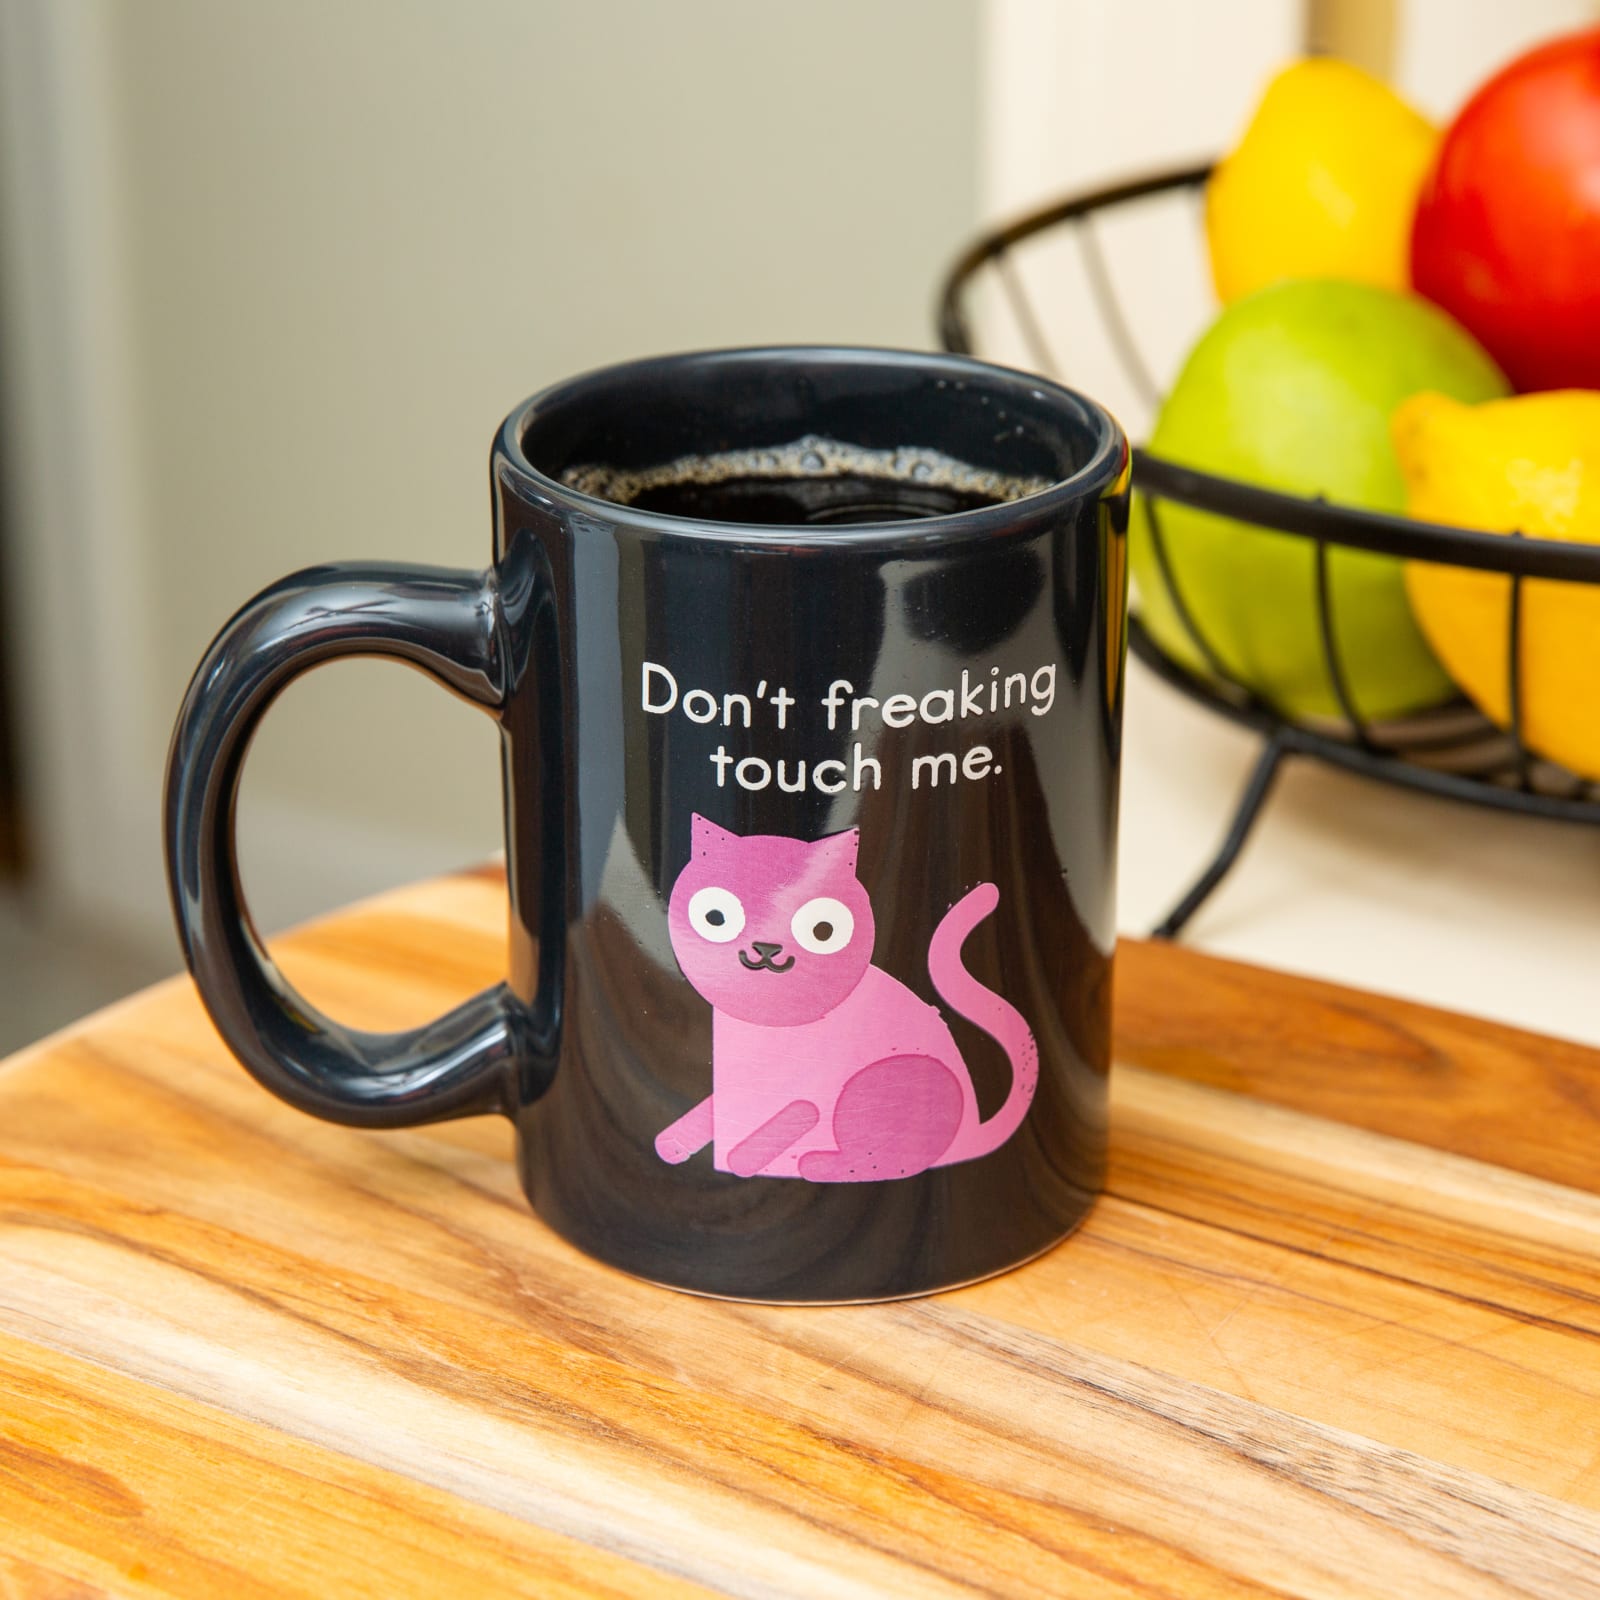 Don't Freaking Touch Me Mug